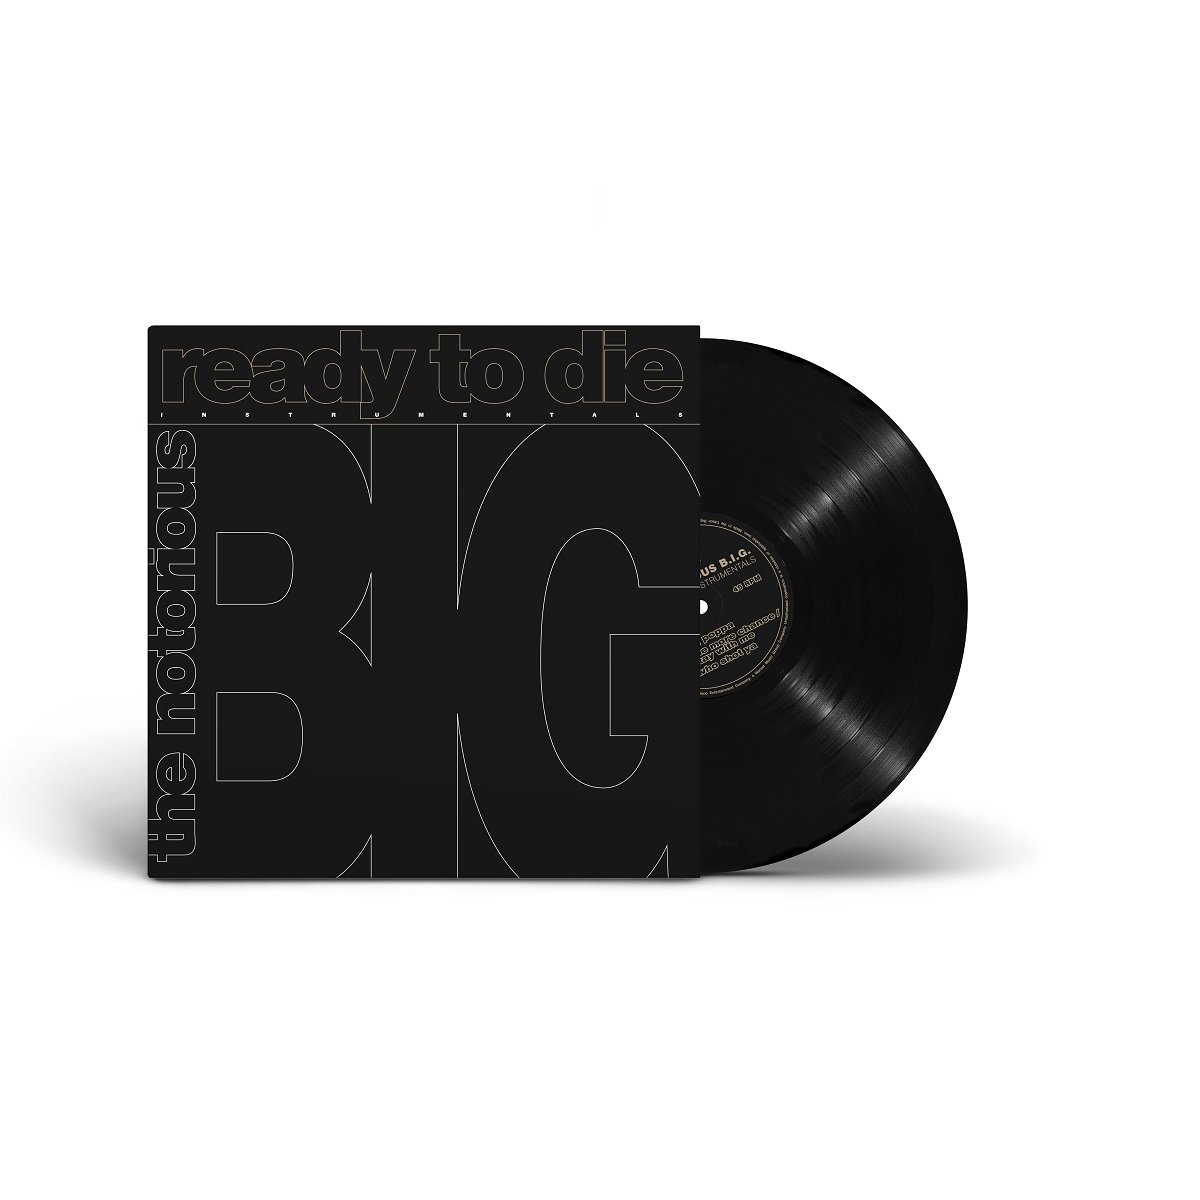 CD Shop - NOTORIOUS B.I.G., THE READY TO DIE: THE INSTRUMENTALS